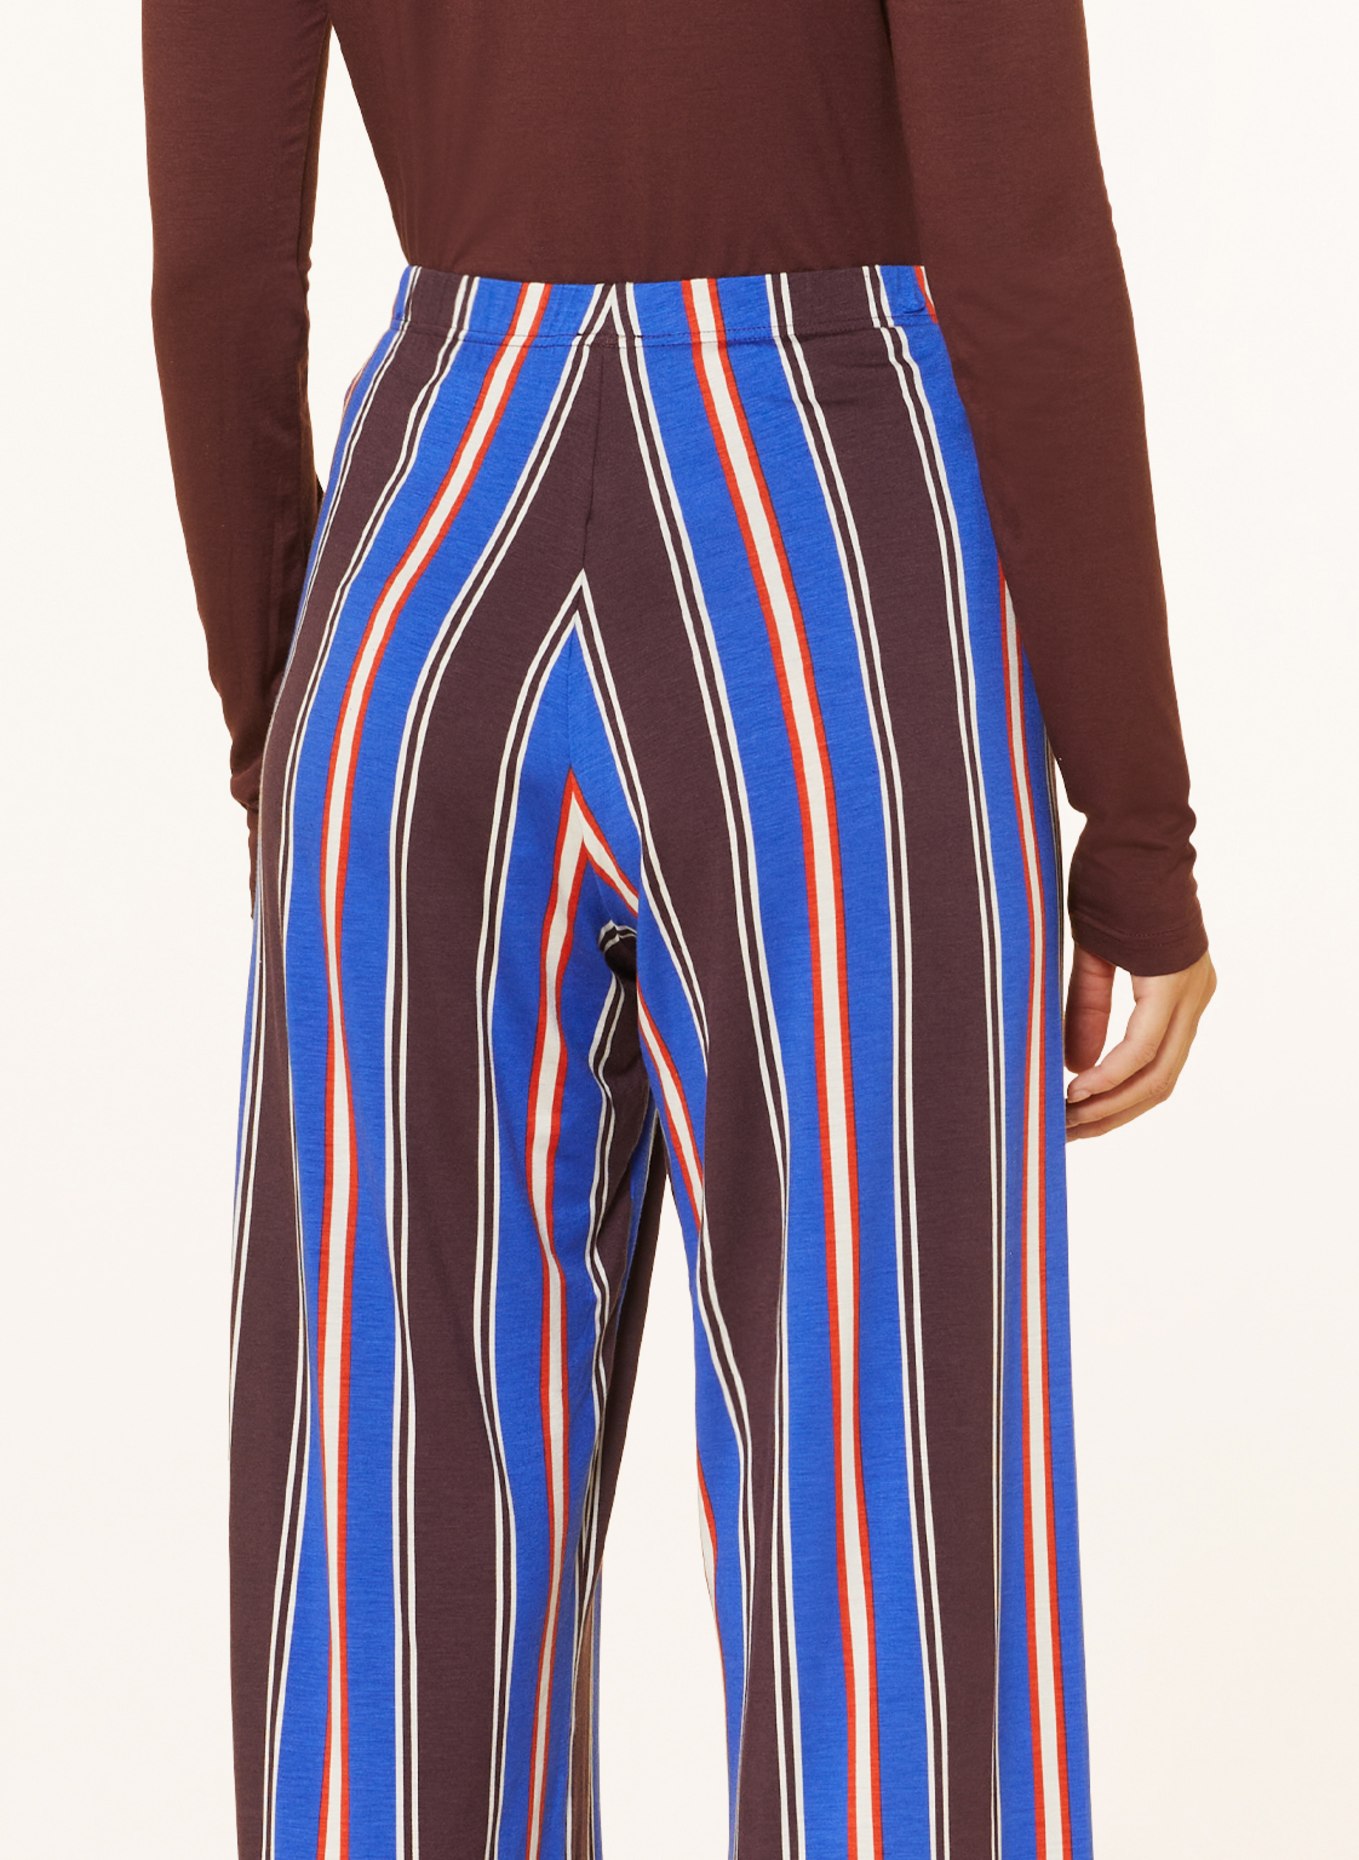 mey Pajama pants CHARLY series, Color: BLUE/ BROWN/ RED (Image 5)